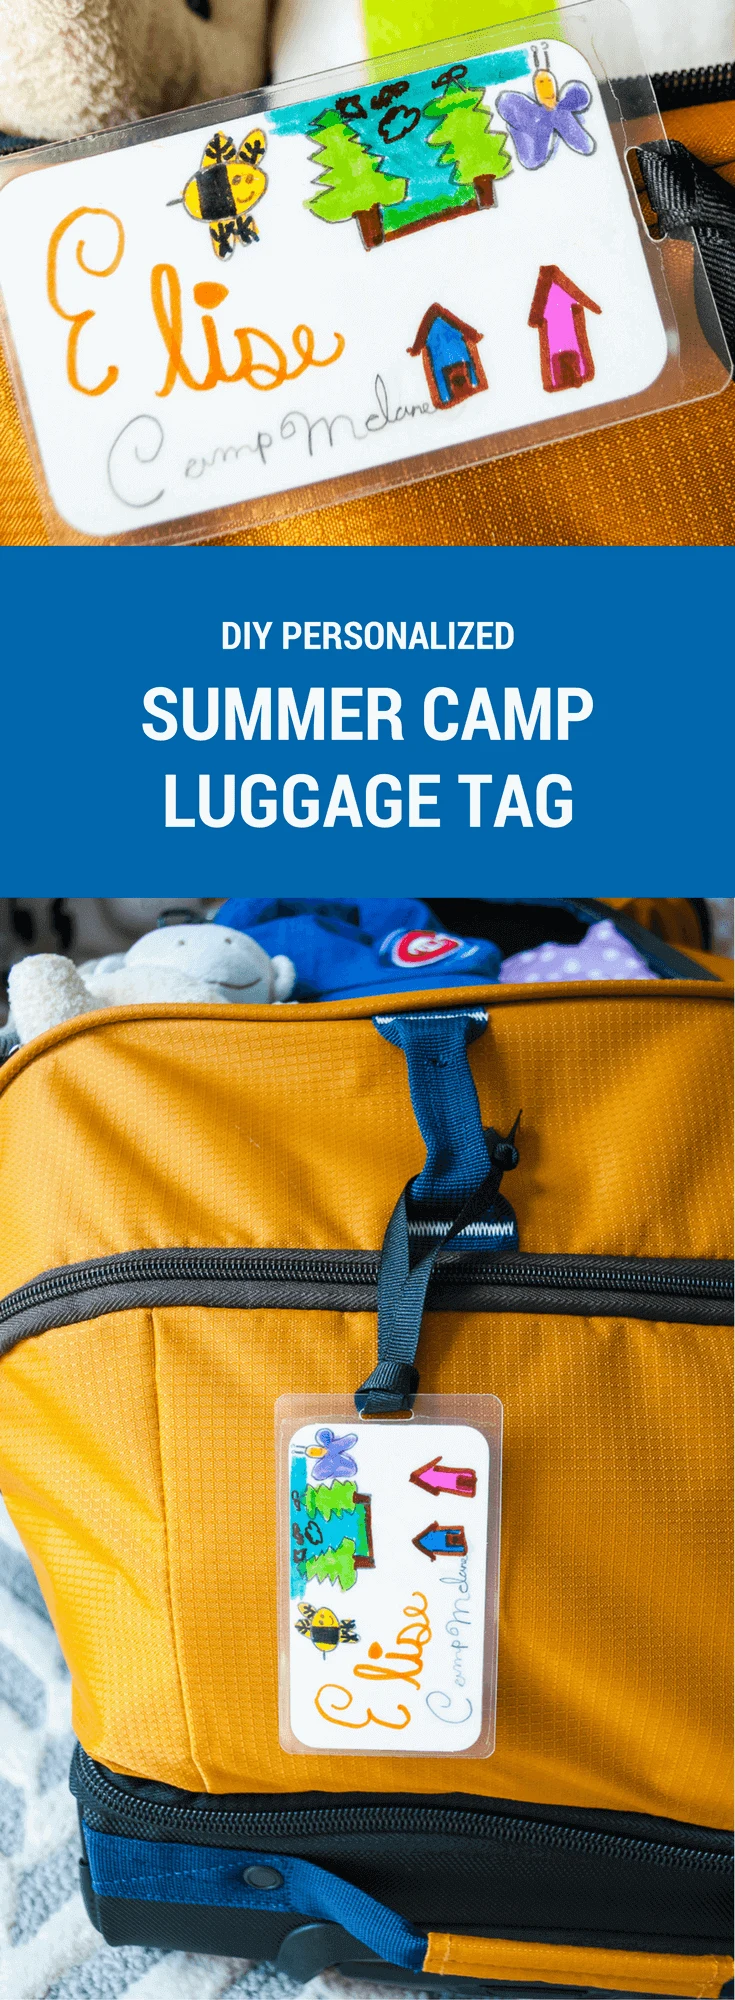 Easy DIY summer camp luggage tag. Super cute and less than $2 to make in less than 30 minutes!